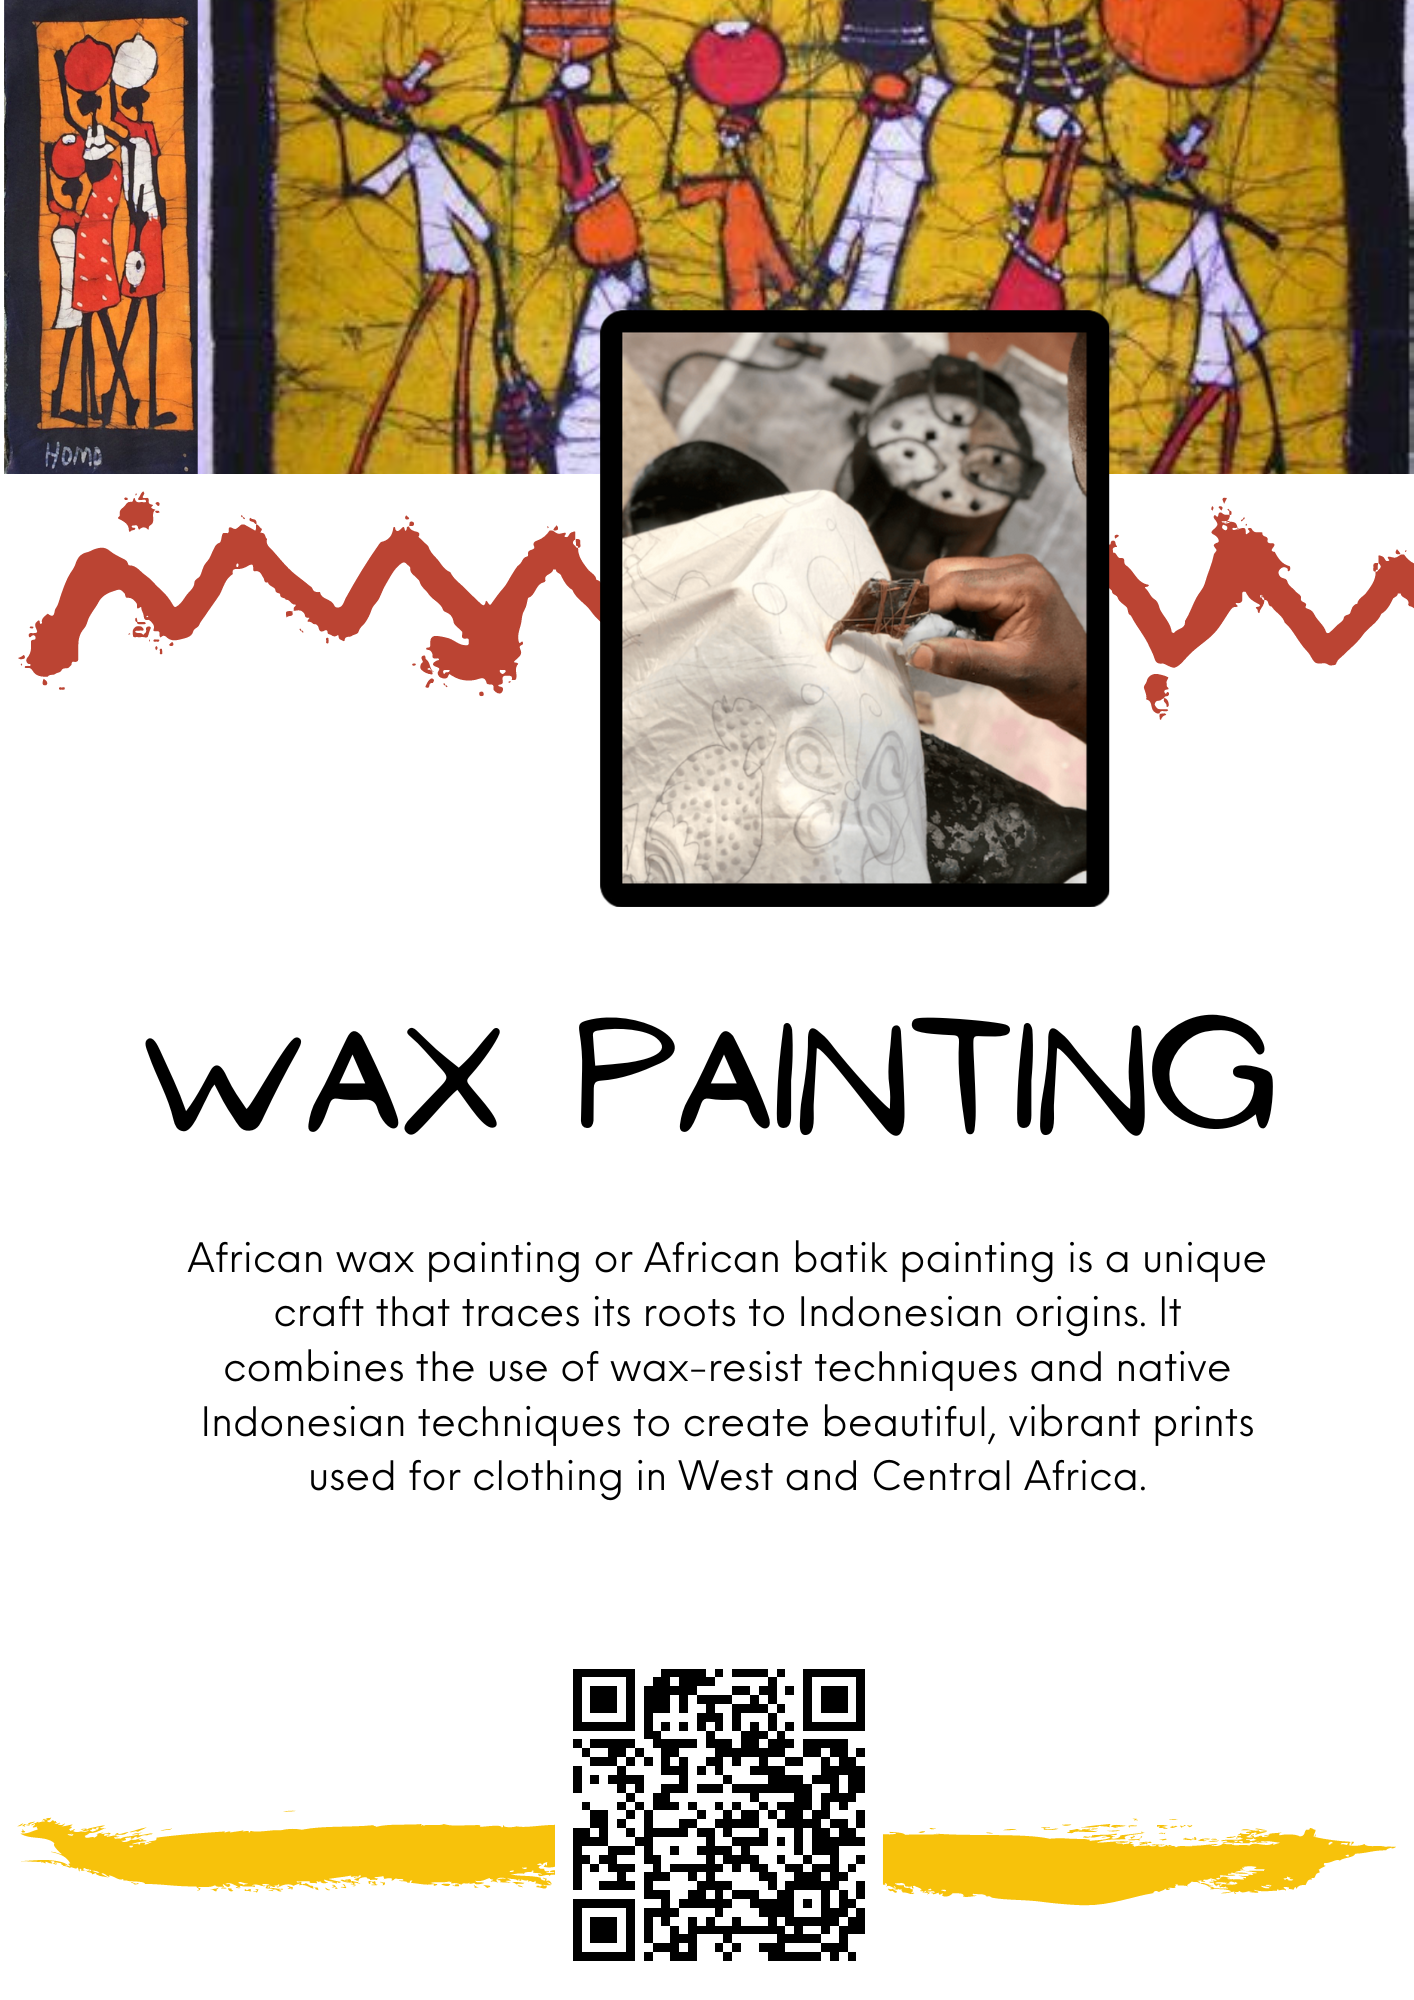 African Wax Painting